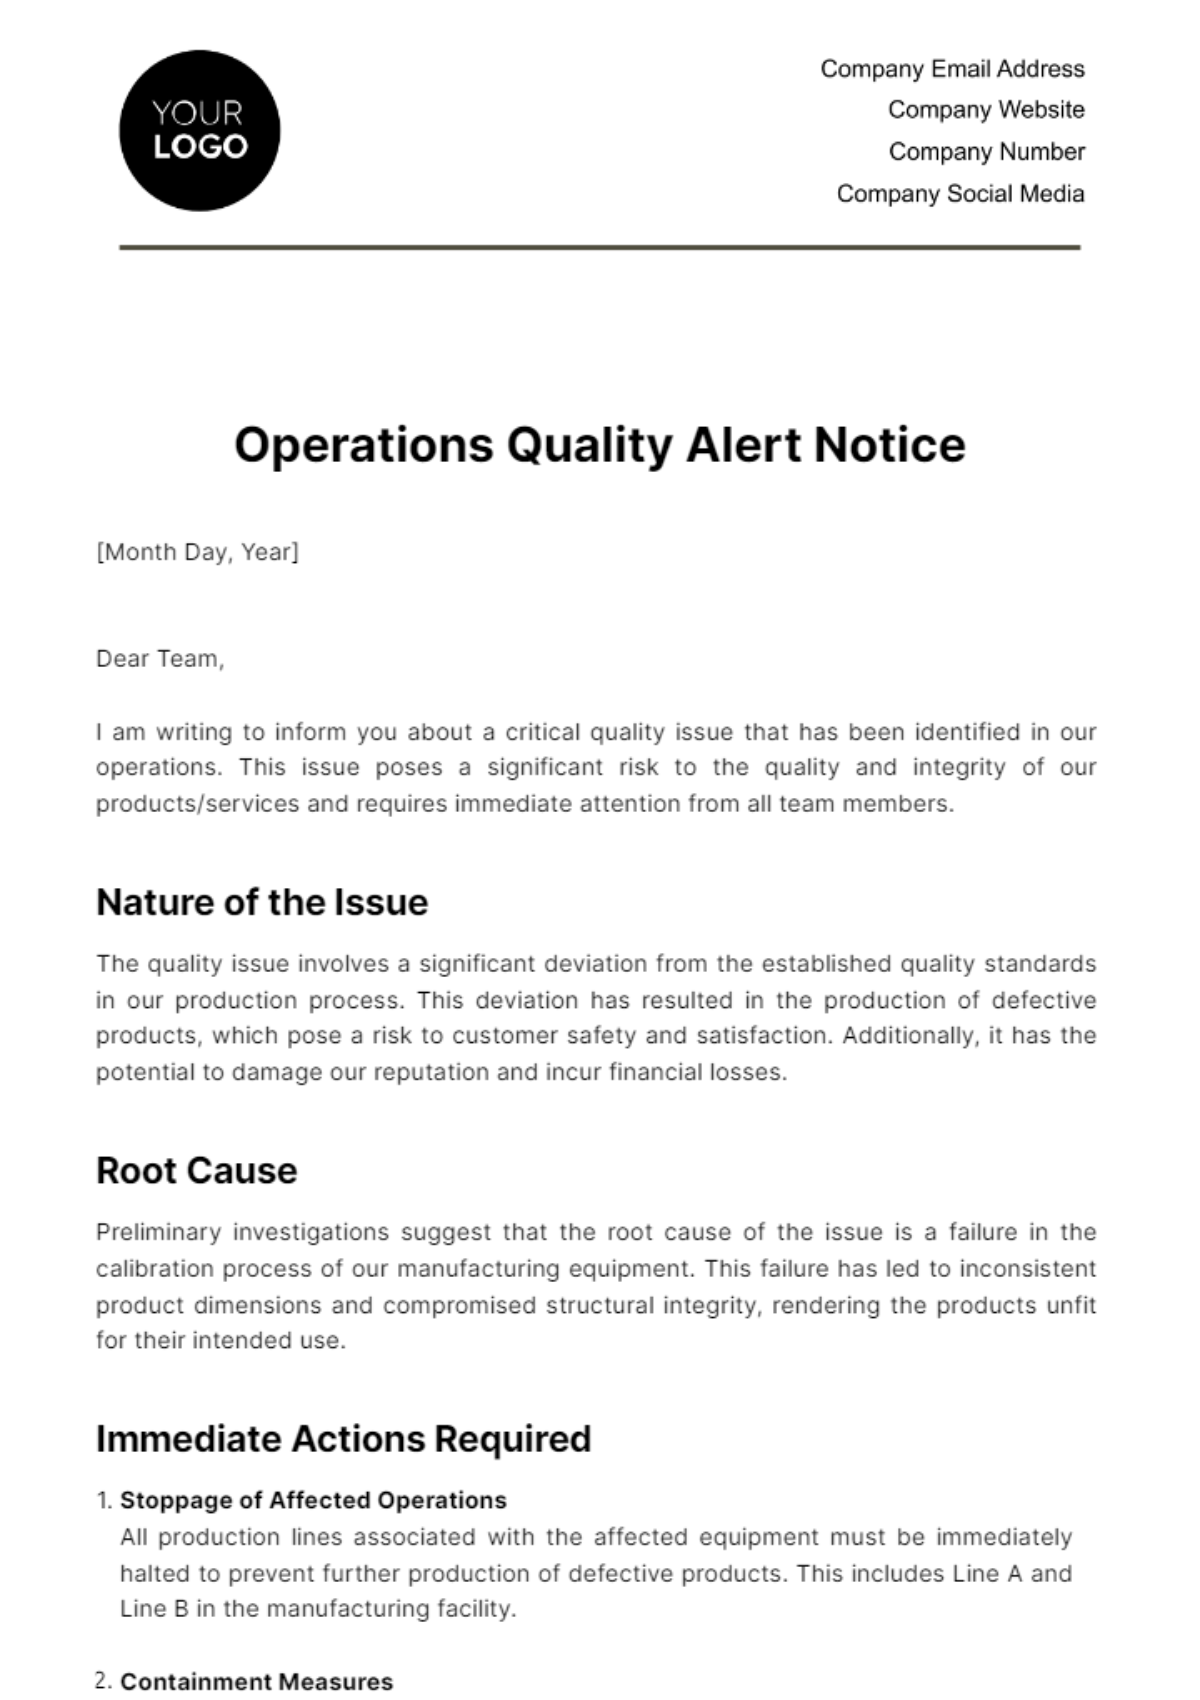 Operations Quality Alert Notice Template